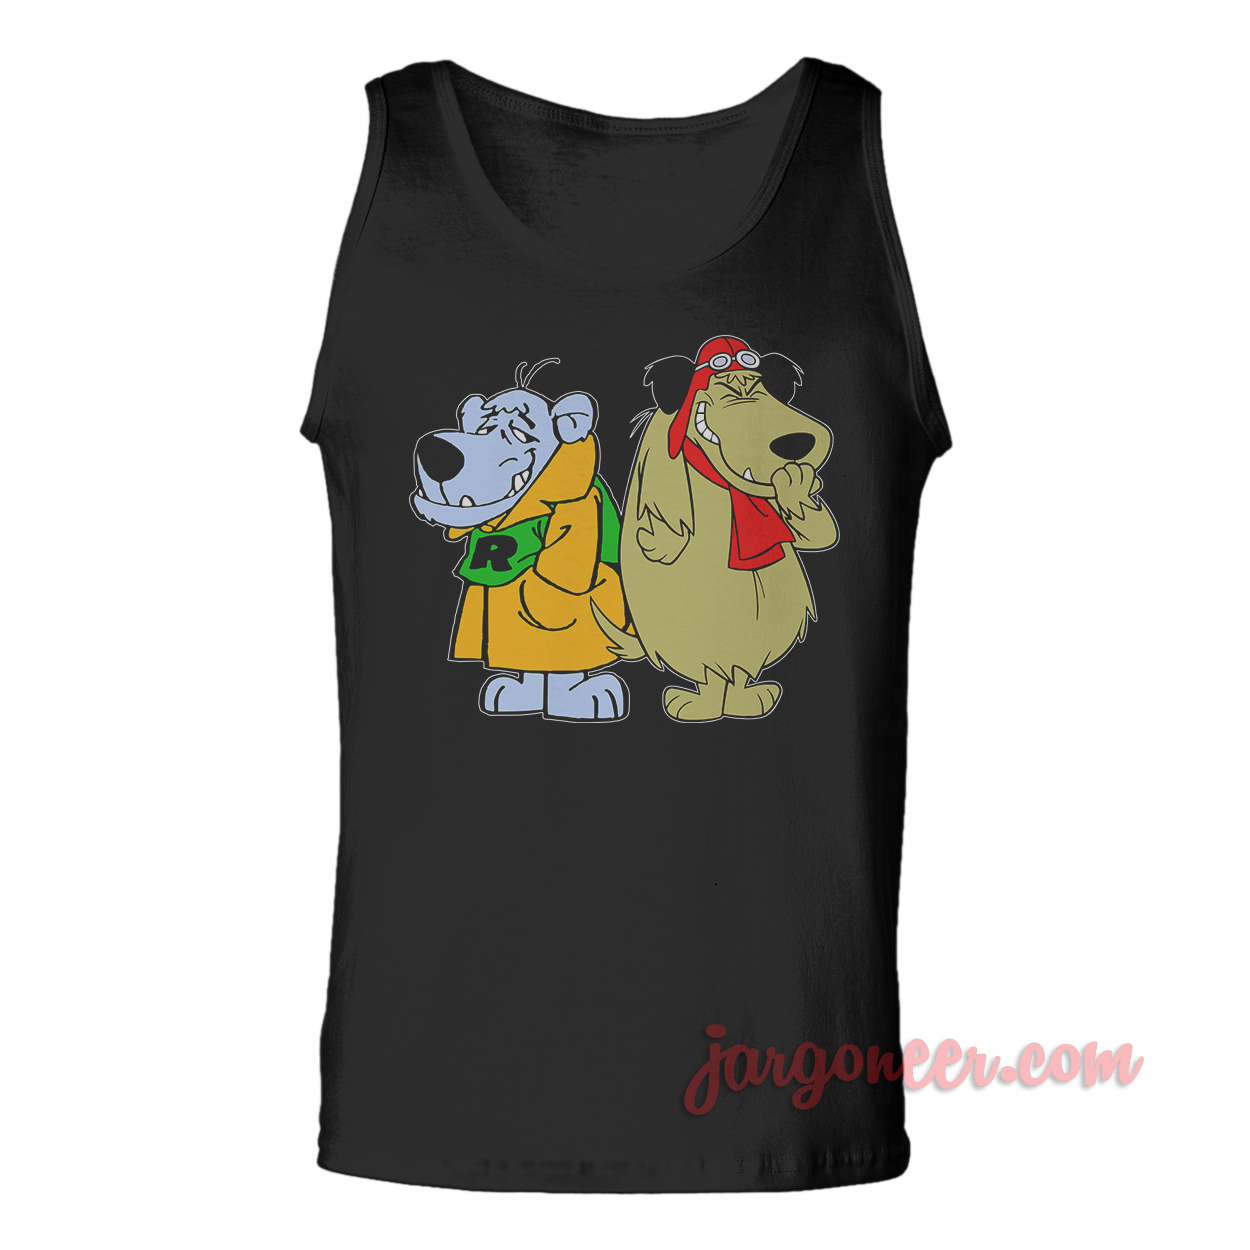 Mumbly And Mutley The Racer Dogs Black TTM - Shop Unique Graphic Cool Shirt Designs